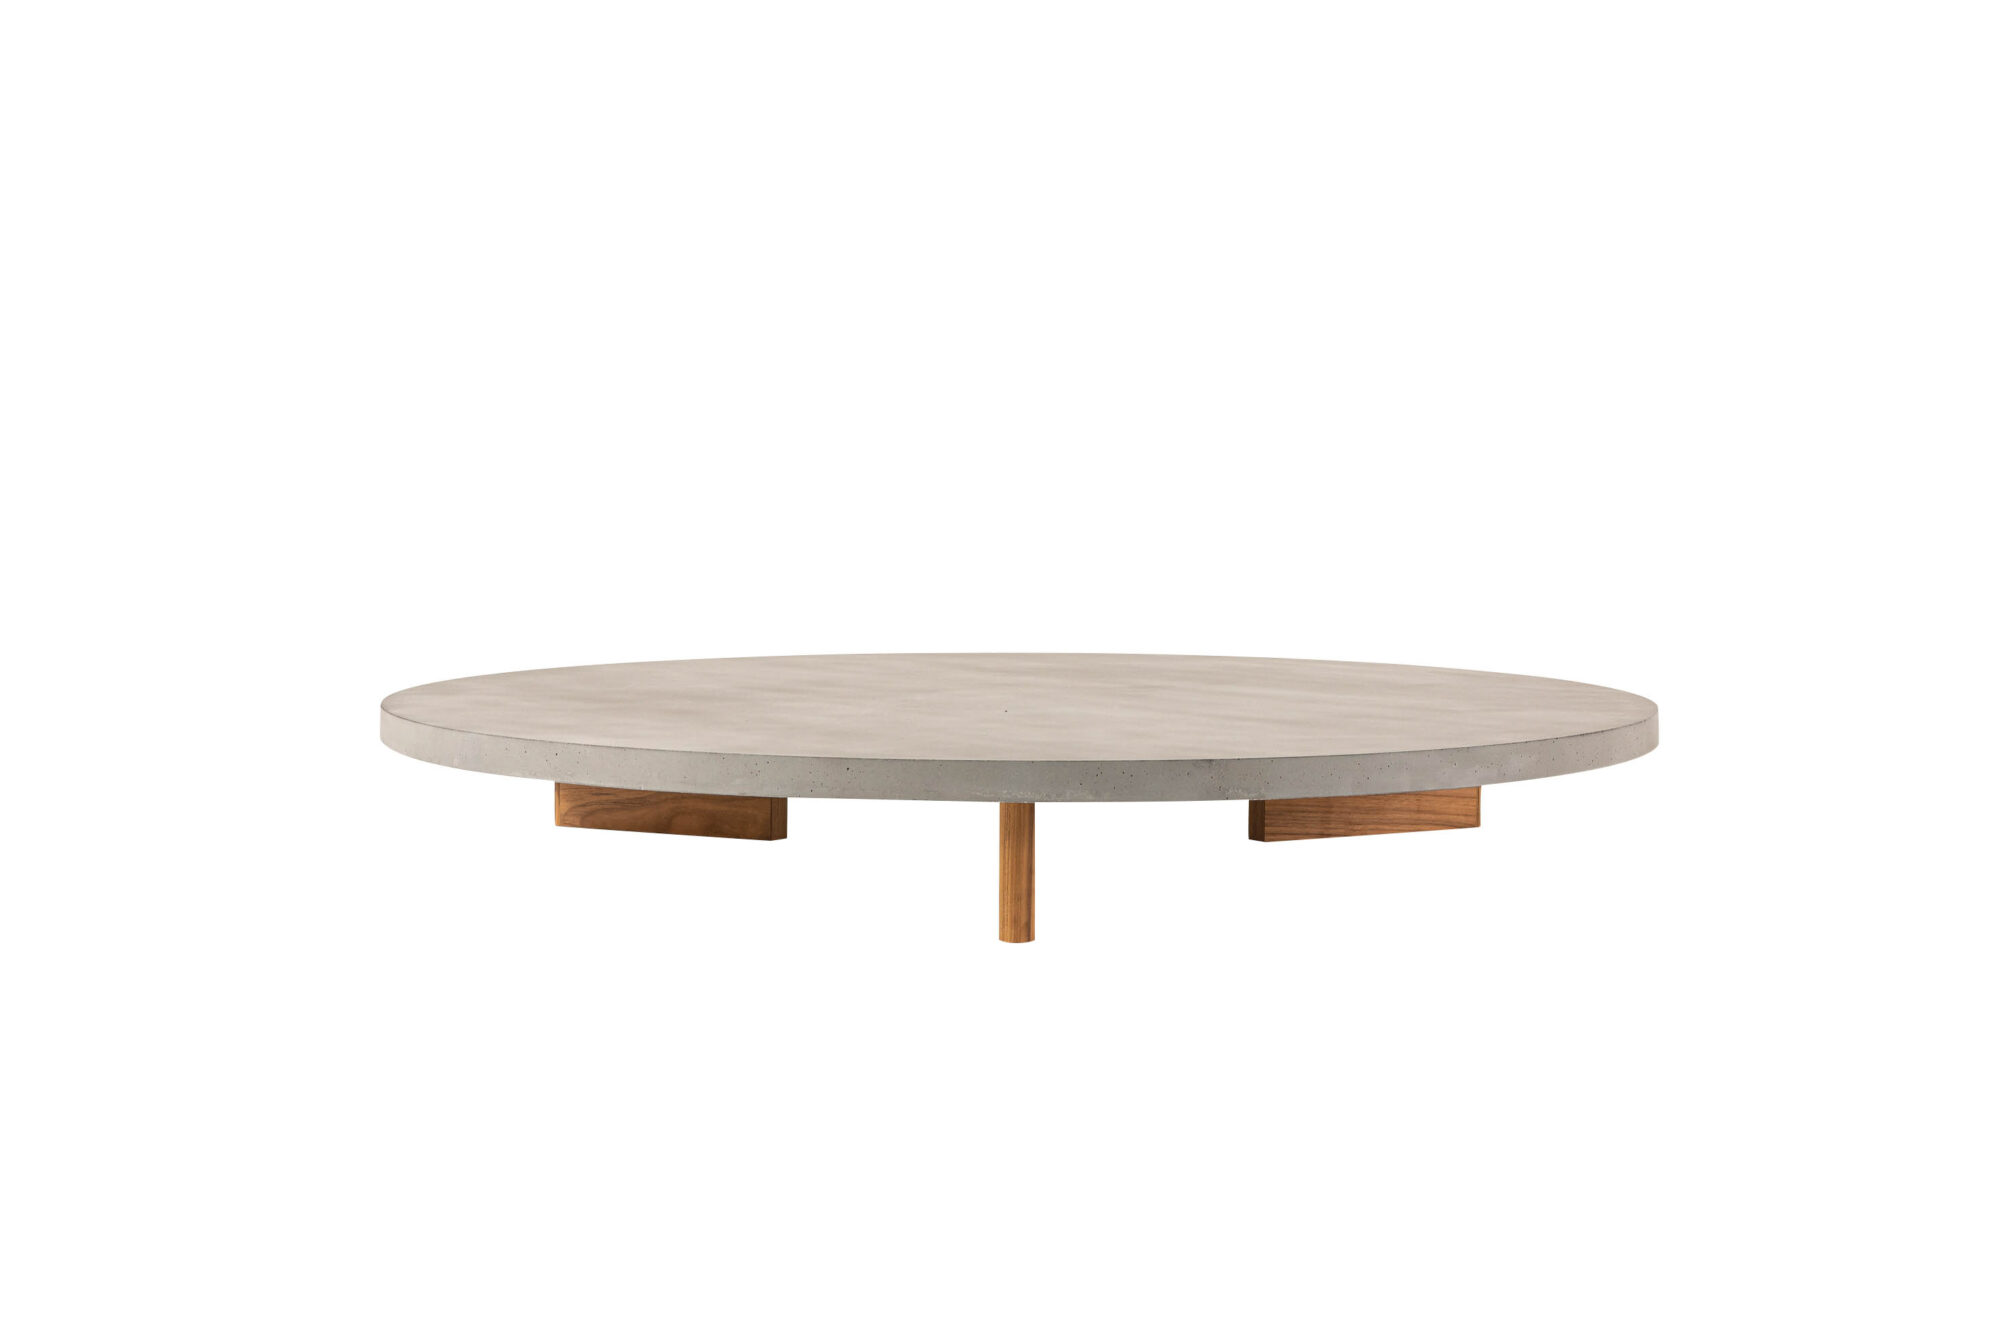 flat brown table inspired by this Frank Lloyd Wright home